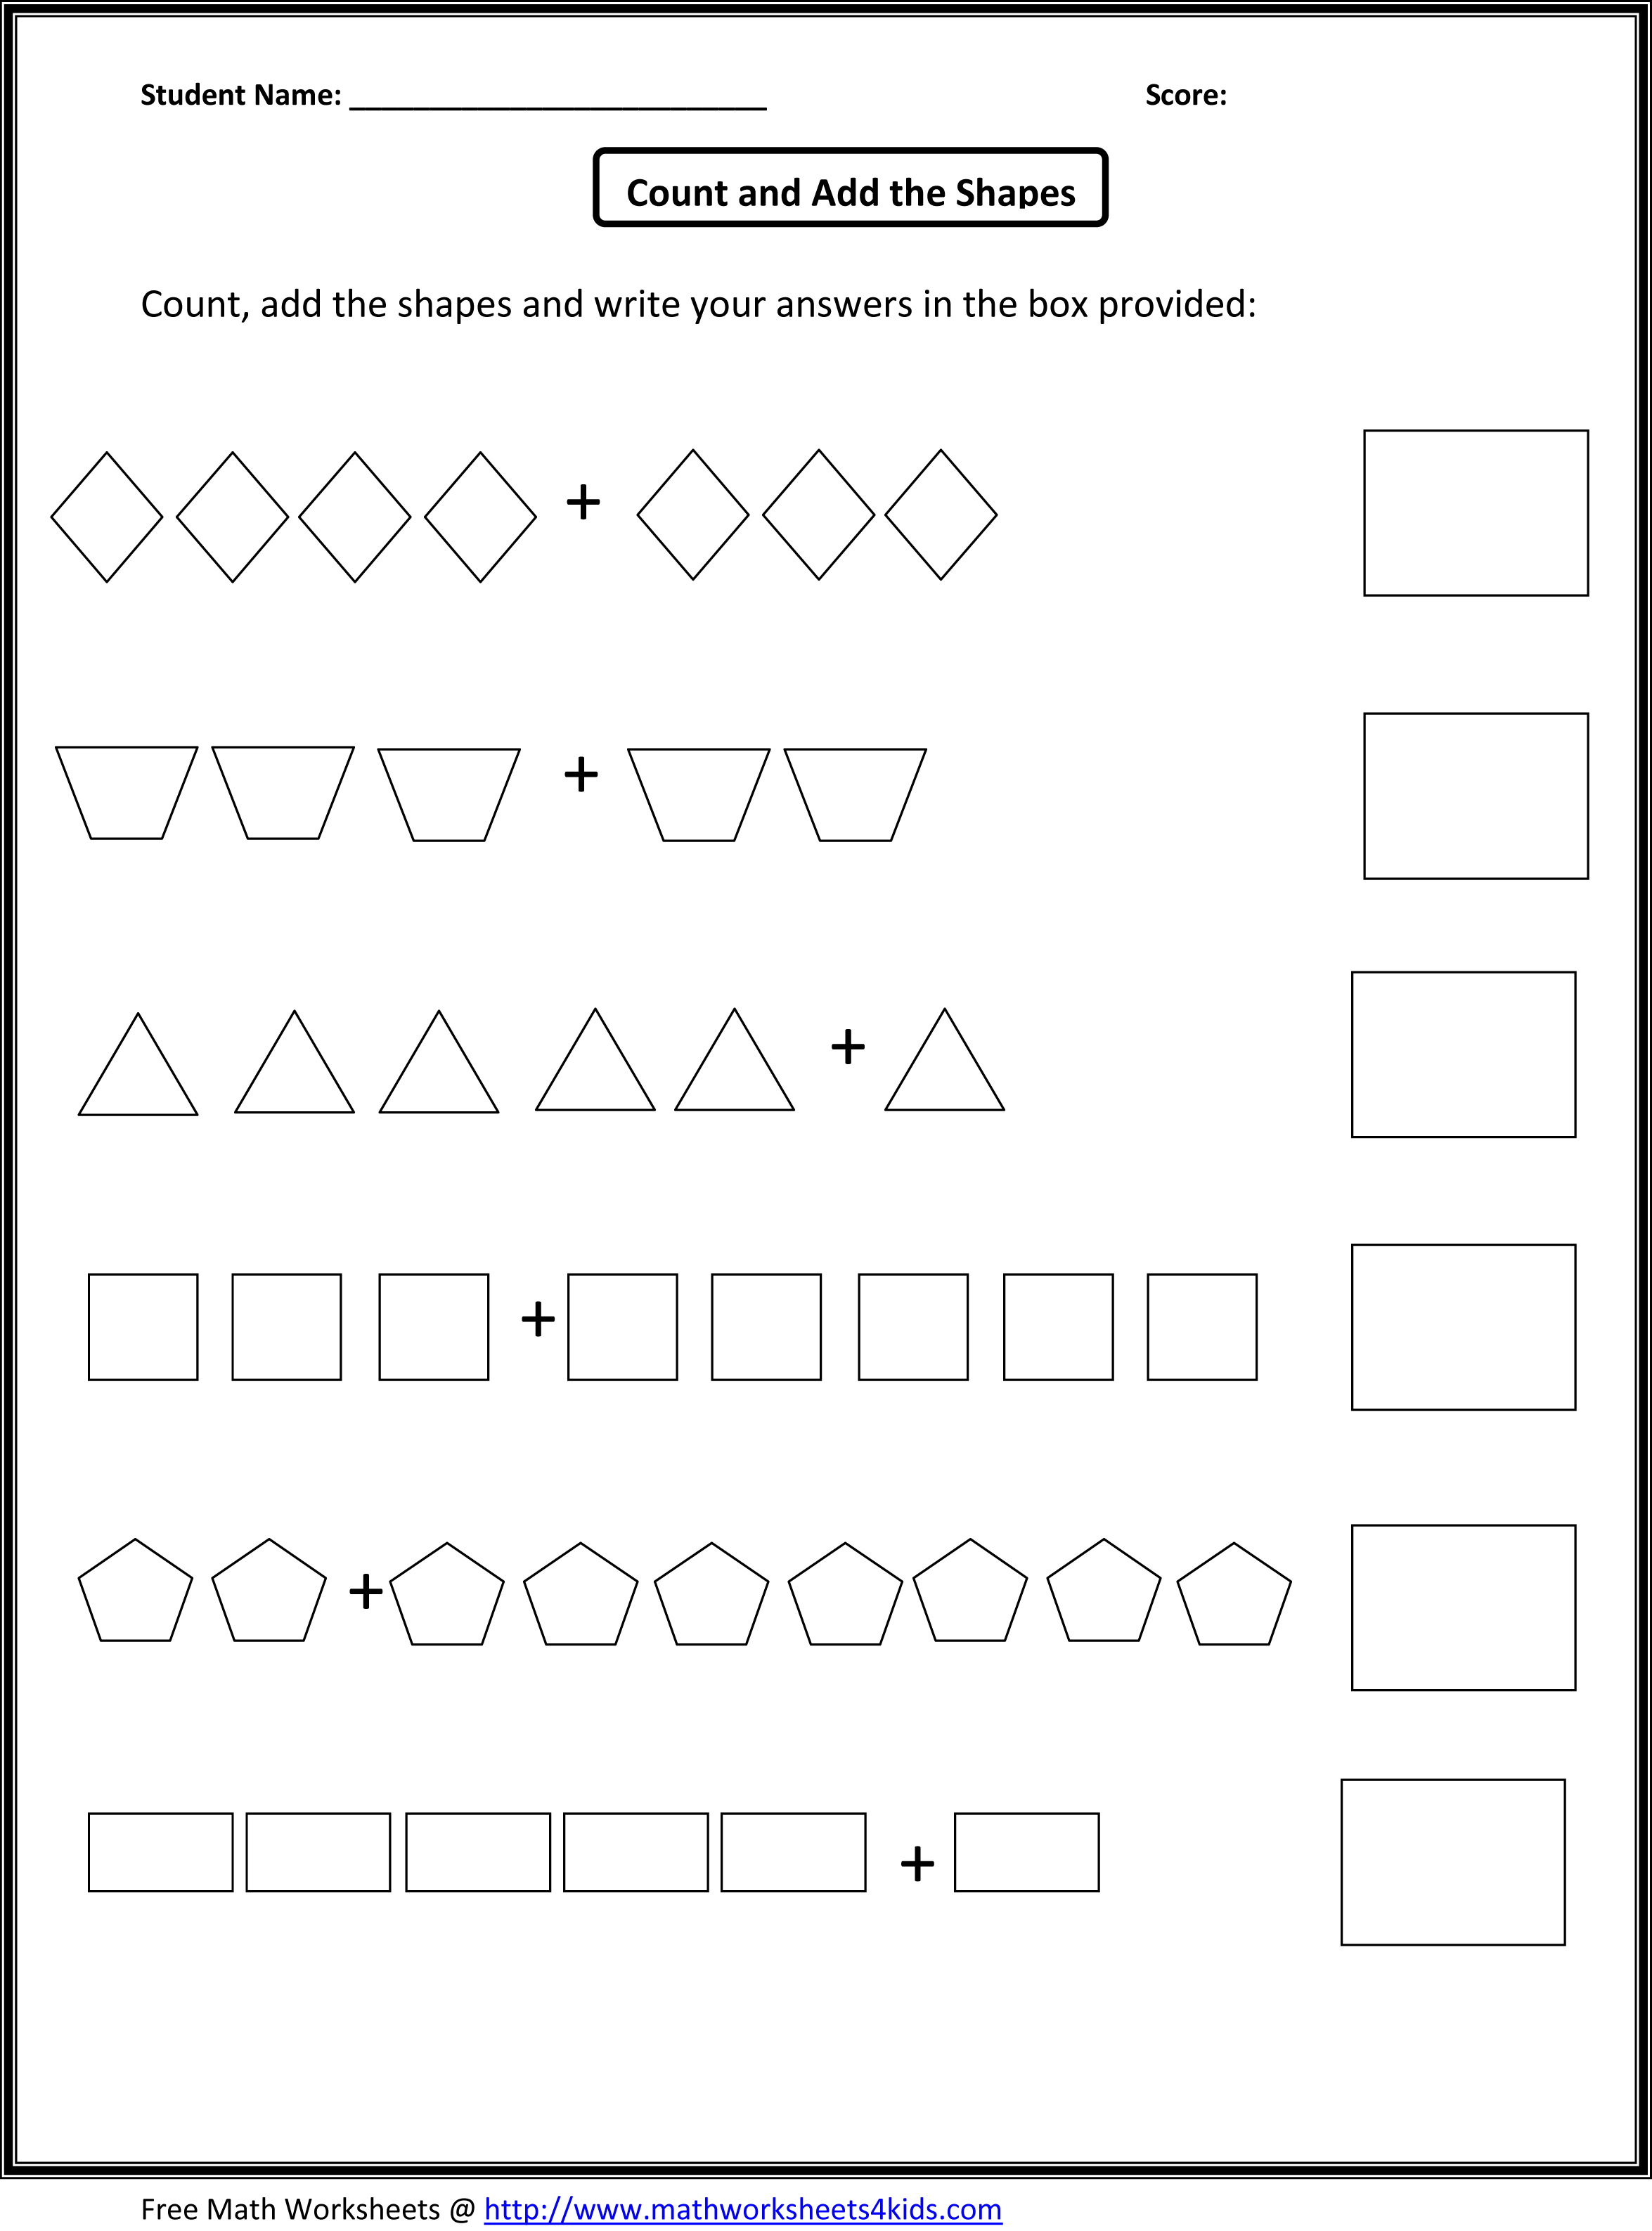 13 Best Images Of Kindergarten Worksheets Counting To 15 Counting By 5 Worksheets Printable